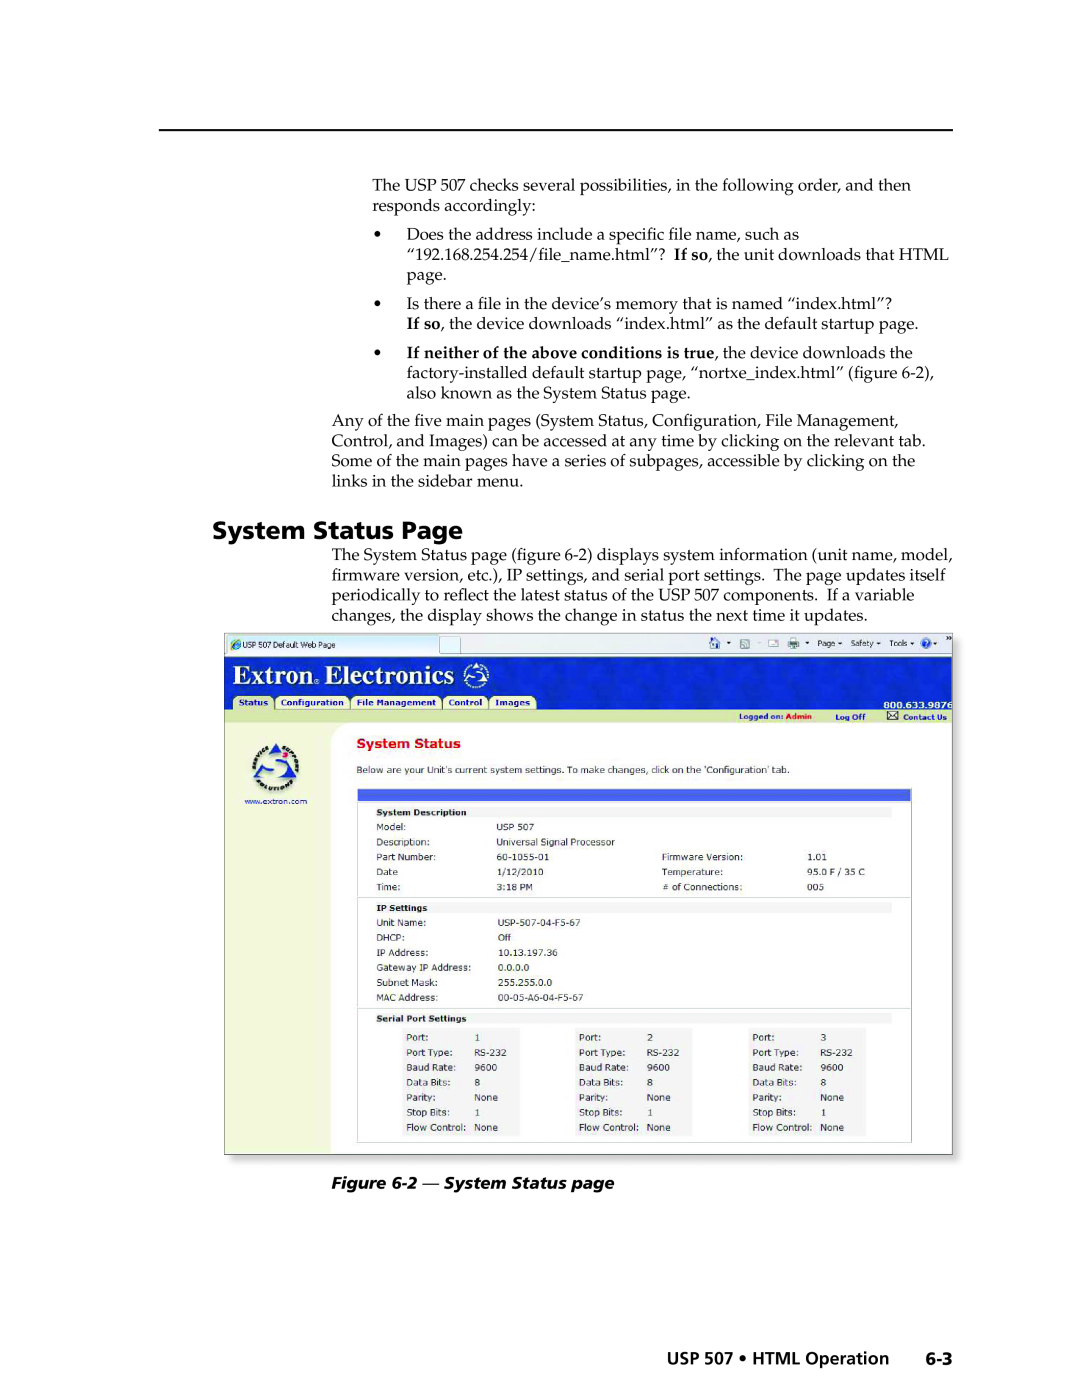 Extron electronic manual System Status Page, 2 — System Status page, USP 507 • HTML Operation 